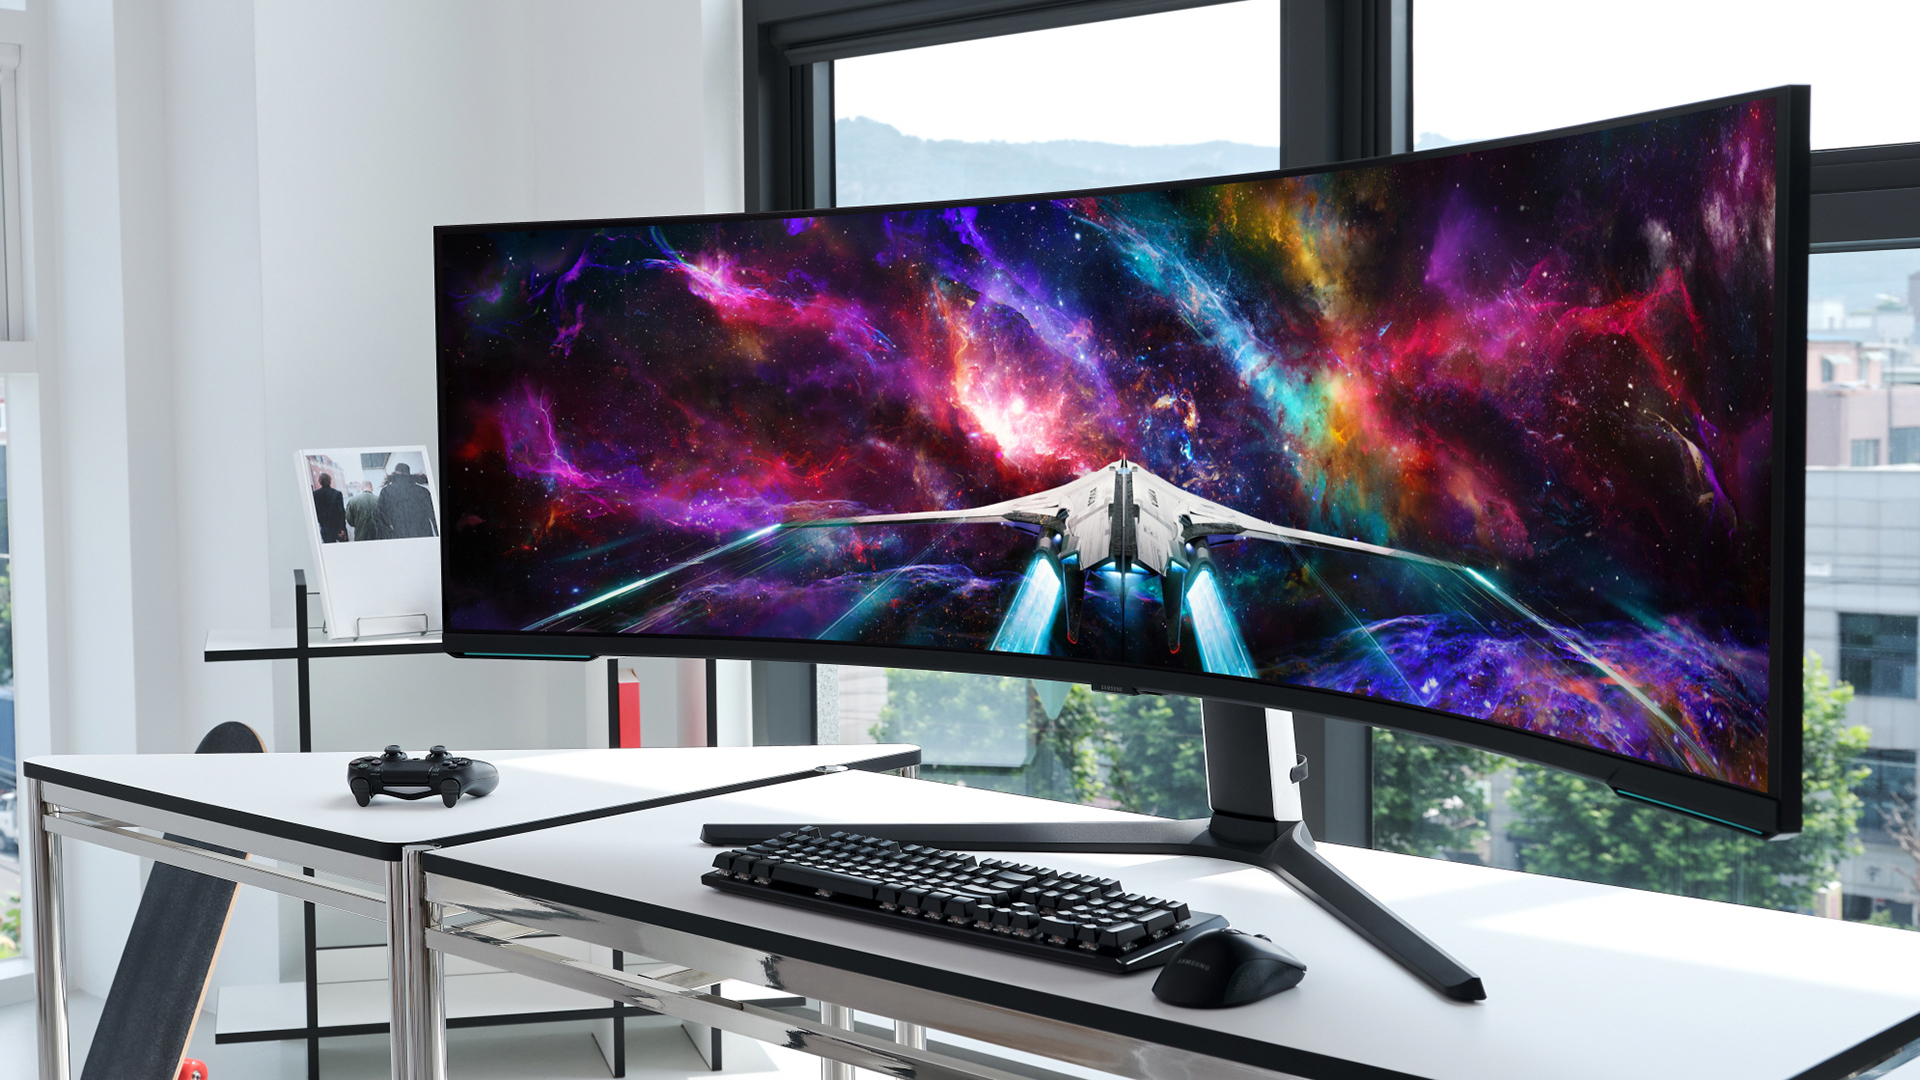 Samsung Launches 57-Inch Odyssey Neo G9: An Ultimate Curved Gaming LCD